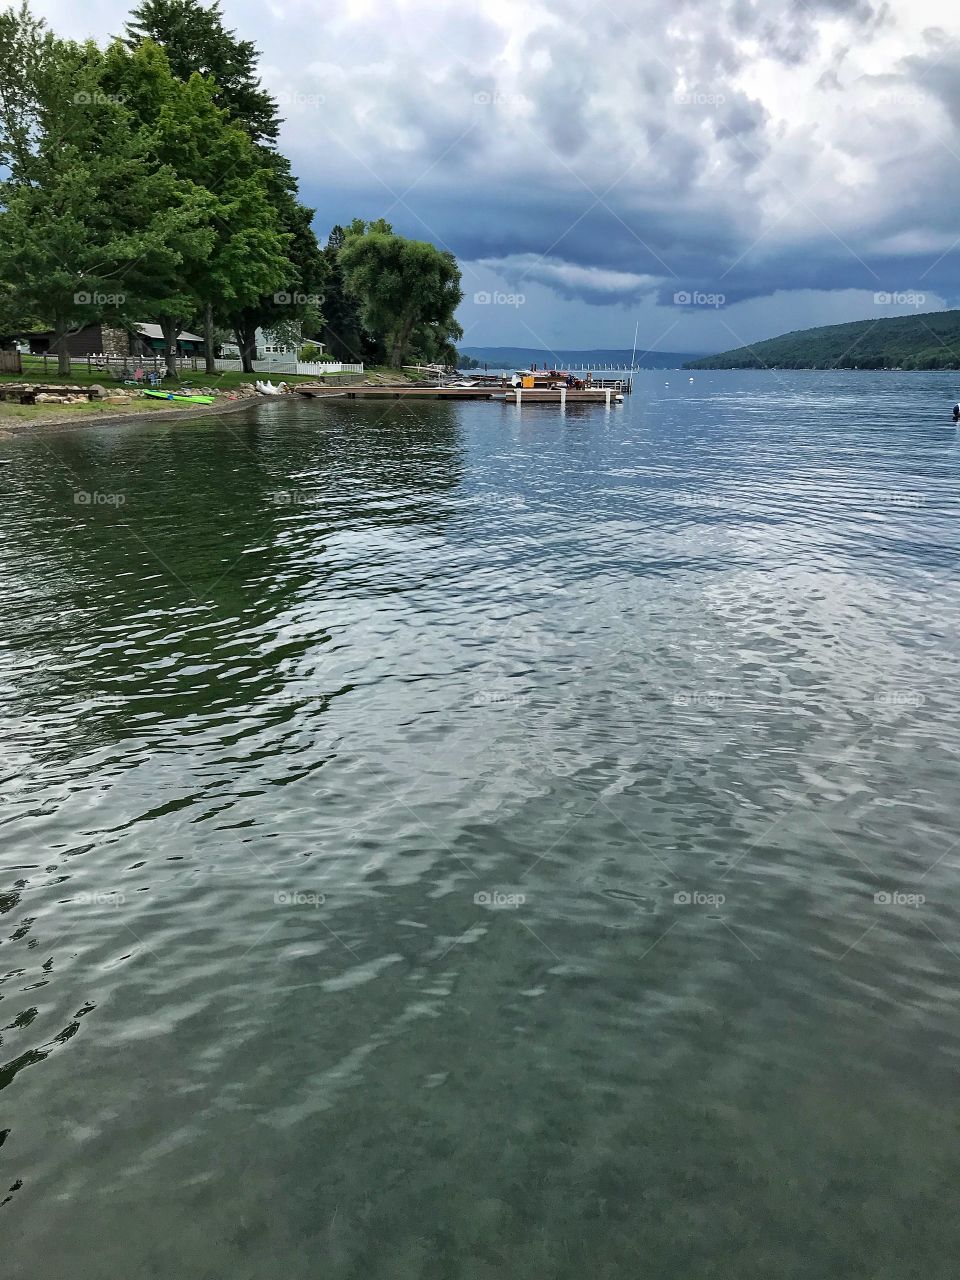 Storm on the lake